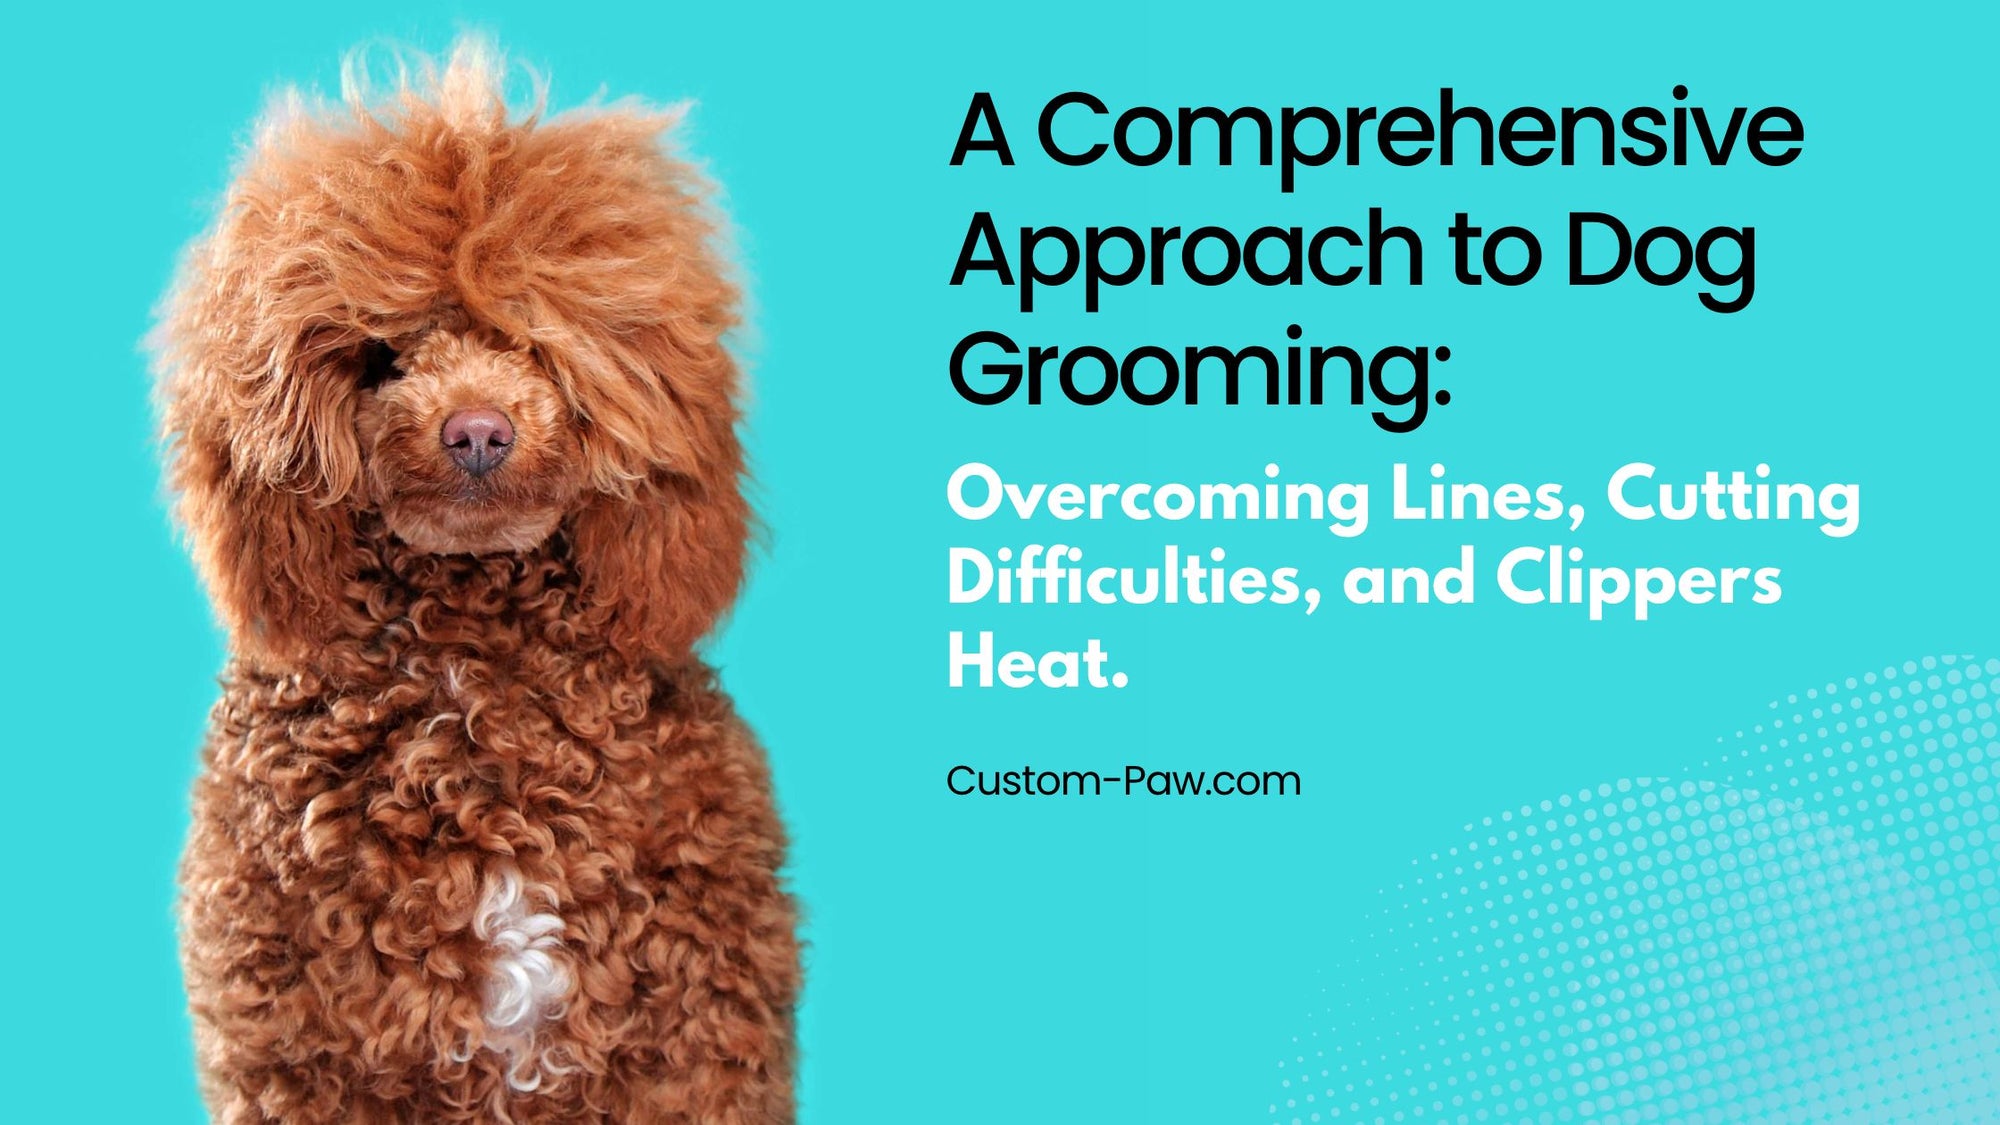 A Comprehensive Approach to Dog Grooming: Overcoming Lines, Cutting Difficulties, and Clippers Heat.